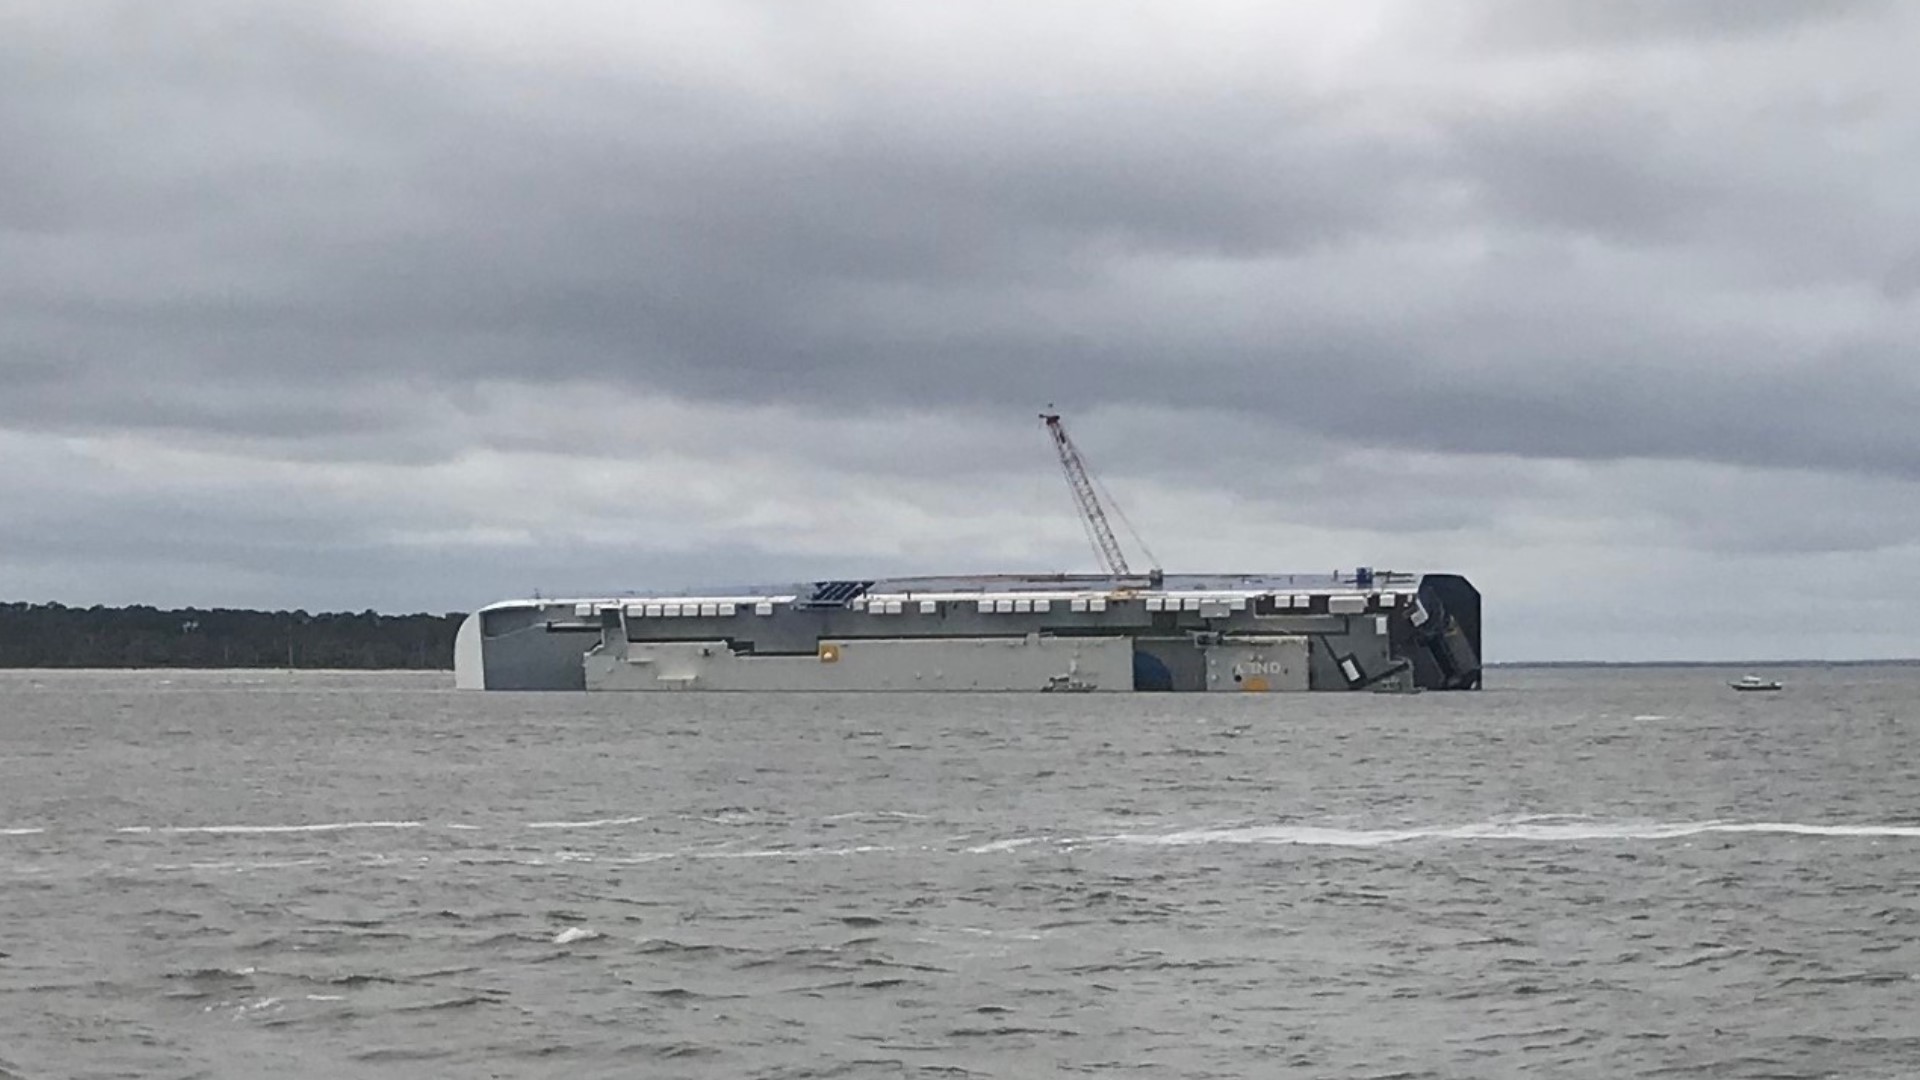 A late morning fire on board the overturned Golden Ray cargo ship was quickly put out Sunday, according to the Altahama Riverkeeper.